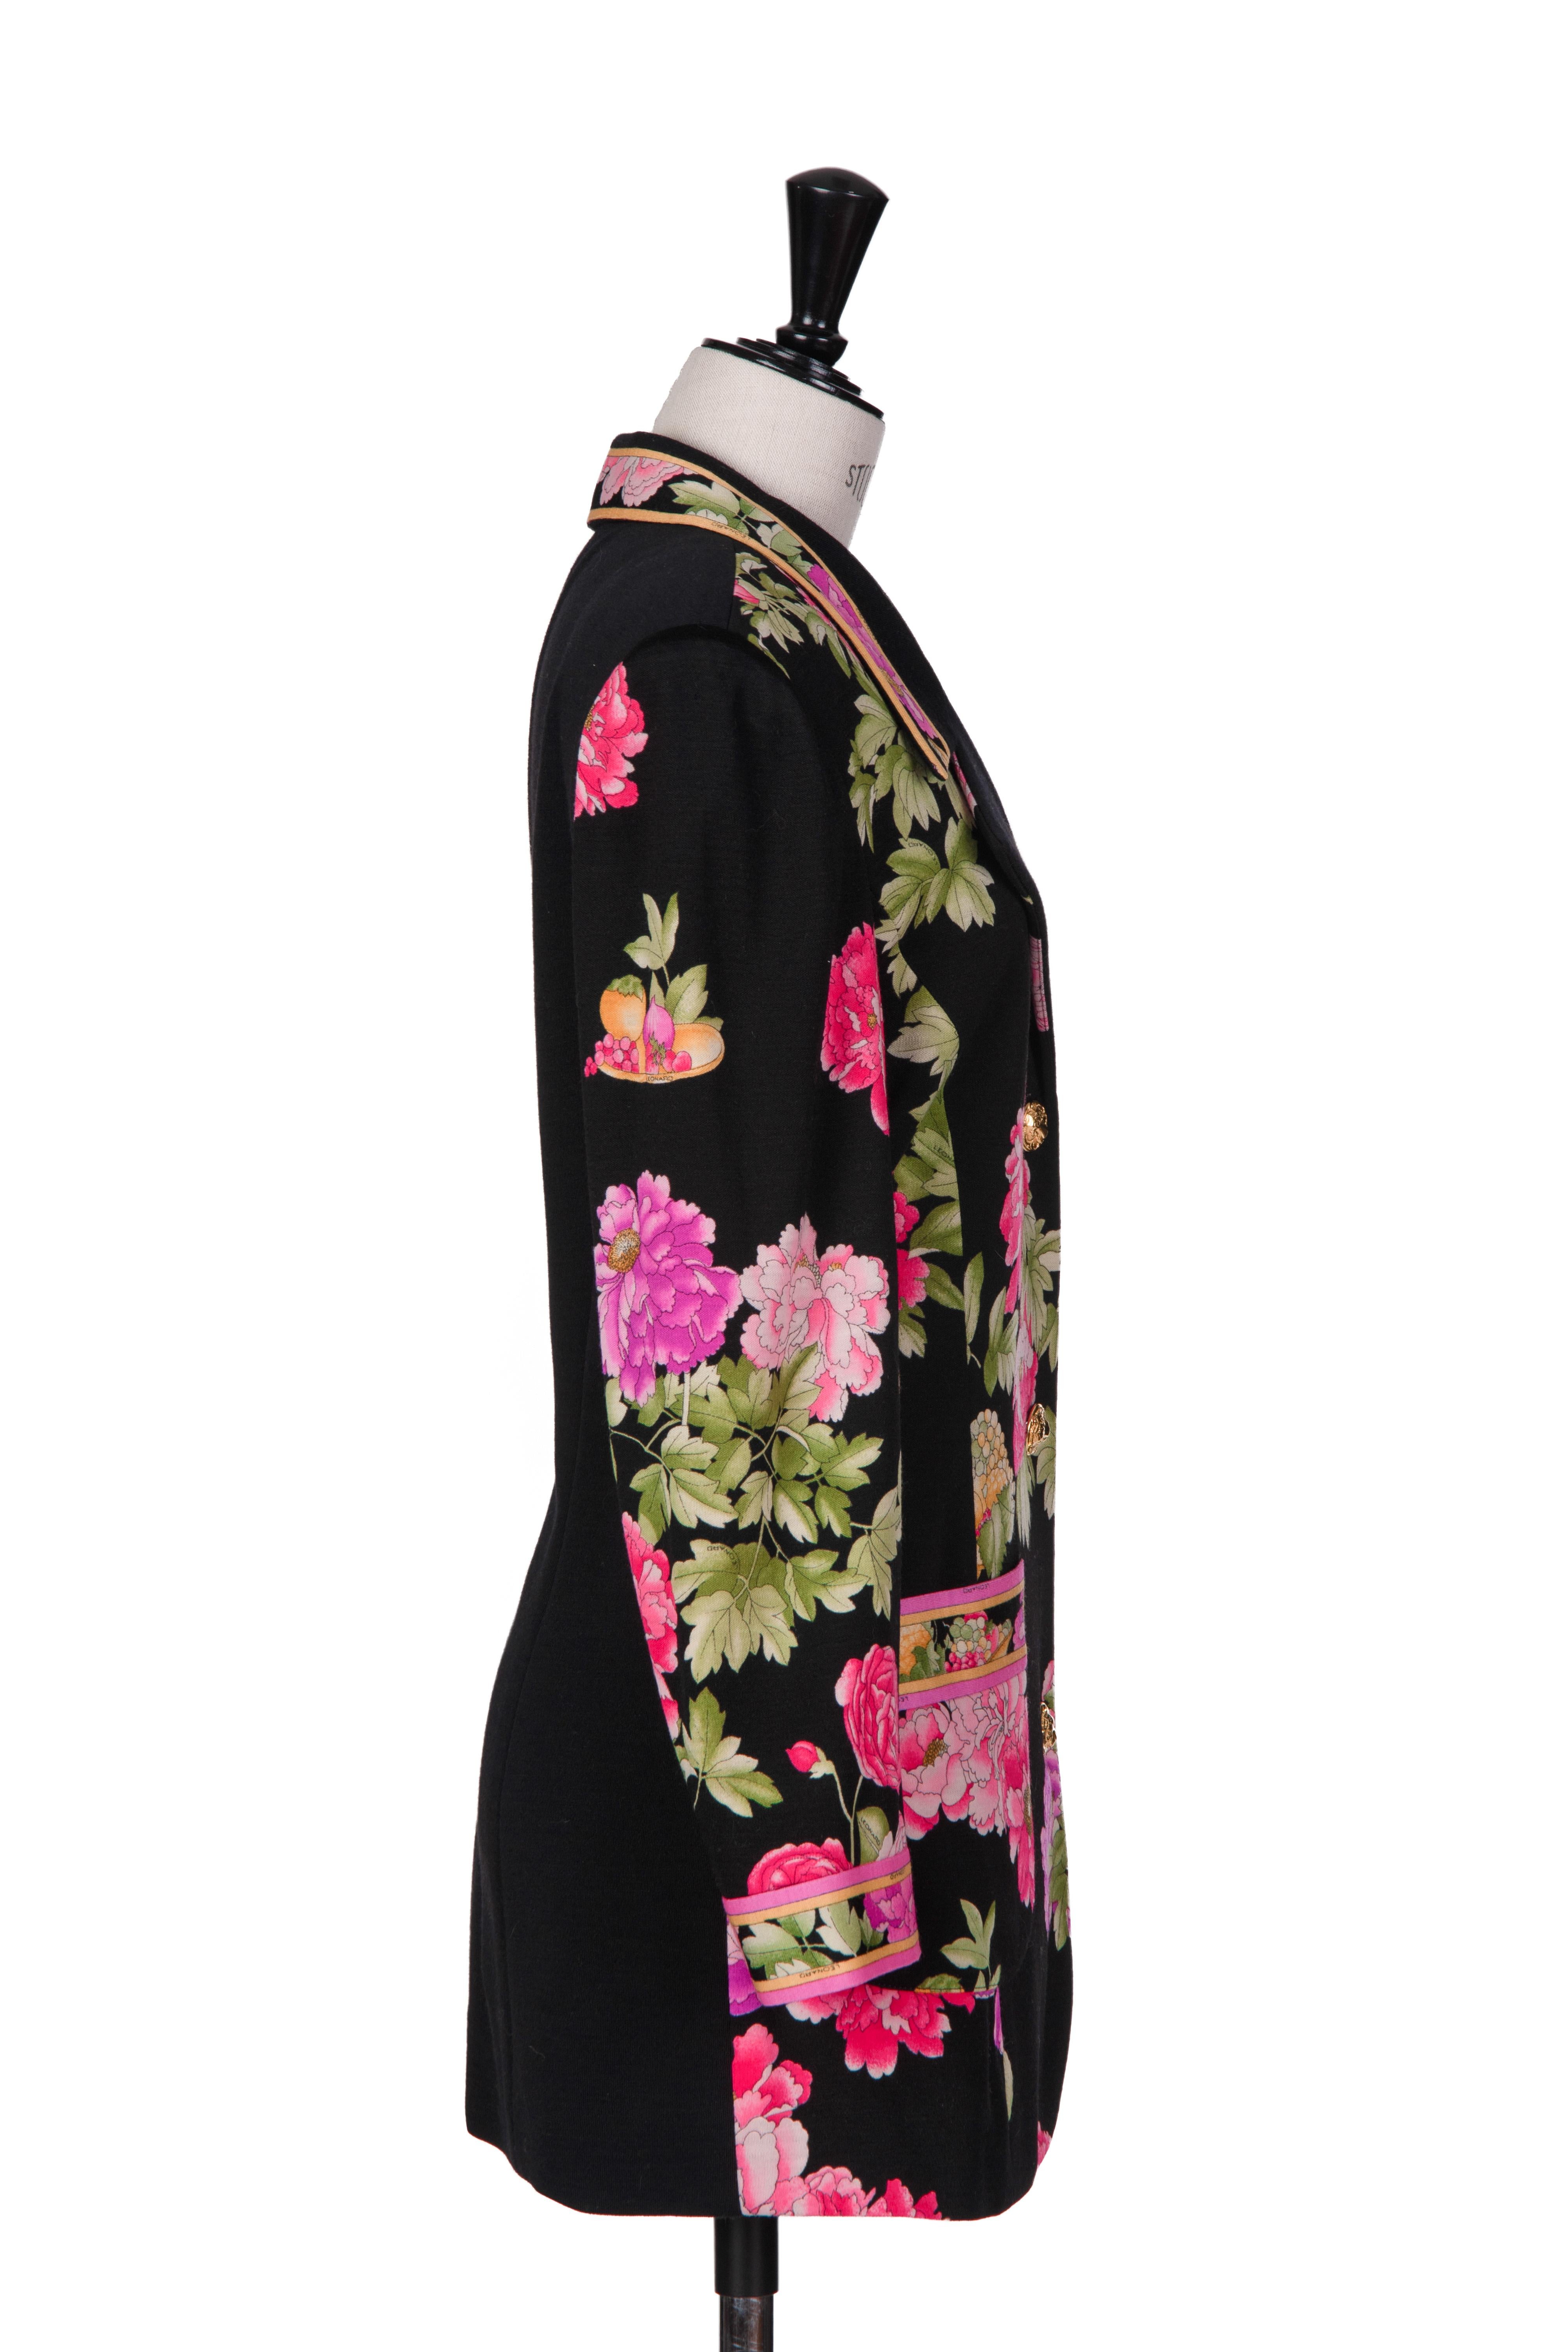 LEONARD PARIS Black Pink Green Wool Knit Jacket with Peony Floral Print, 1990s In Excellent Condition For Sale In Munich, DE